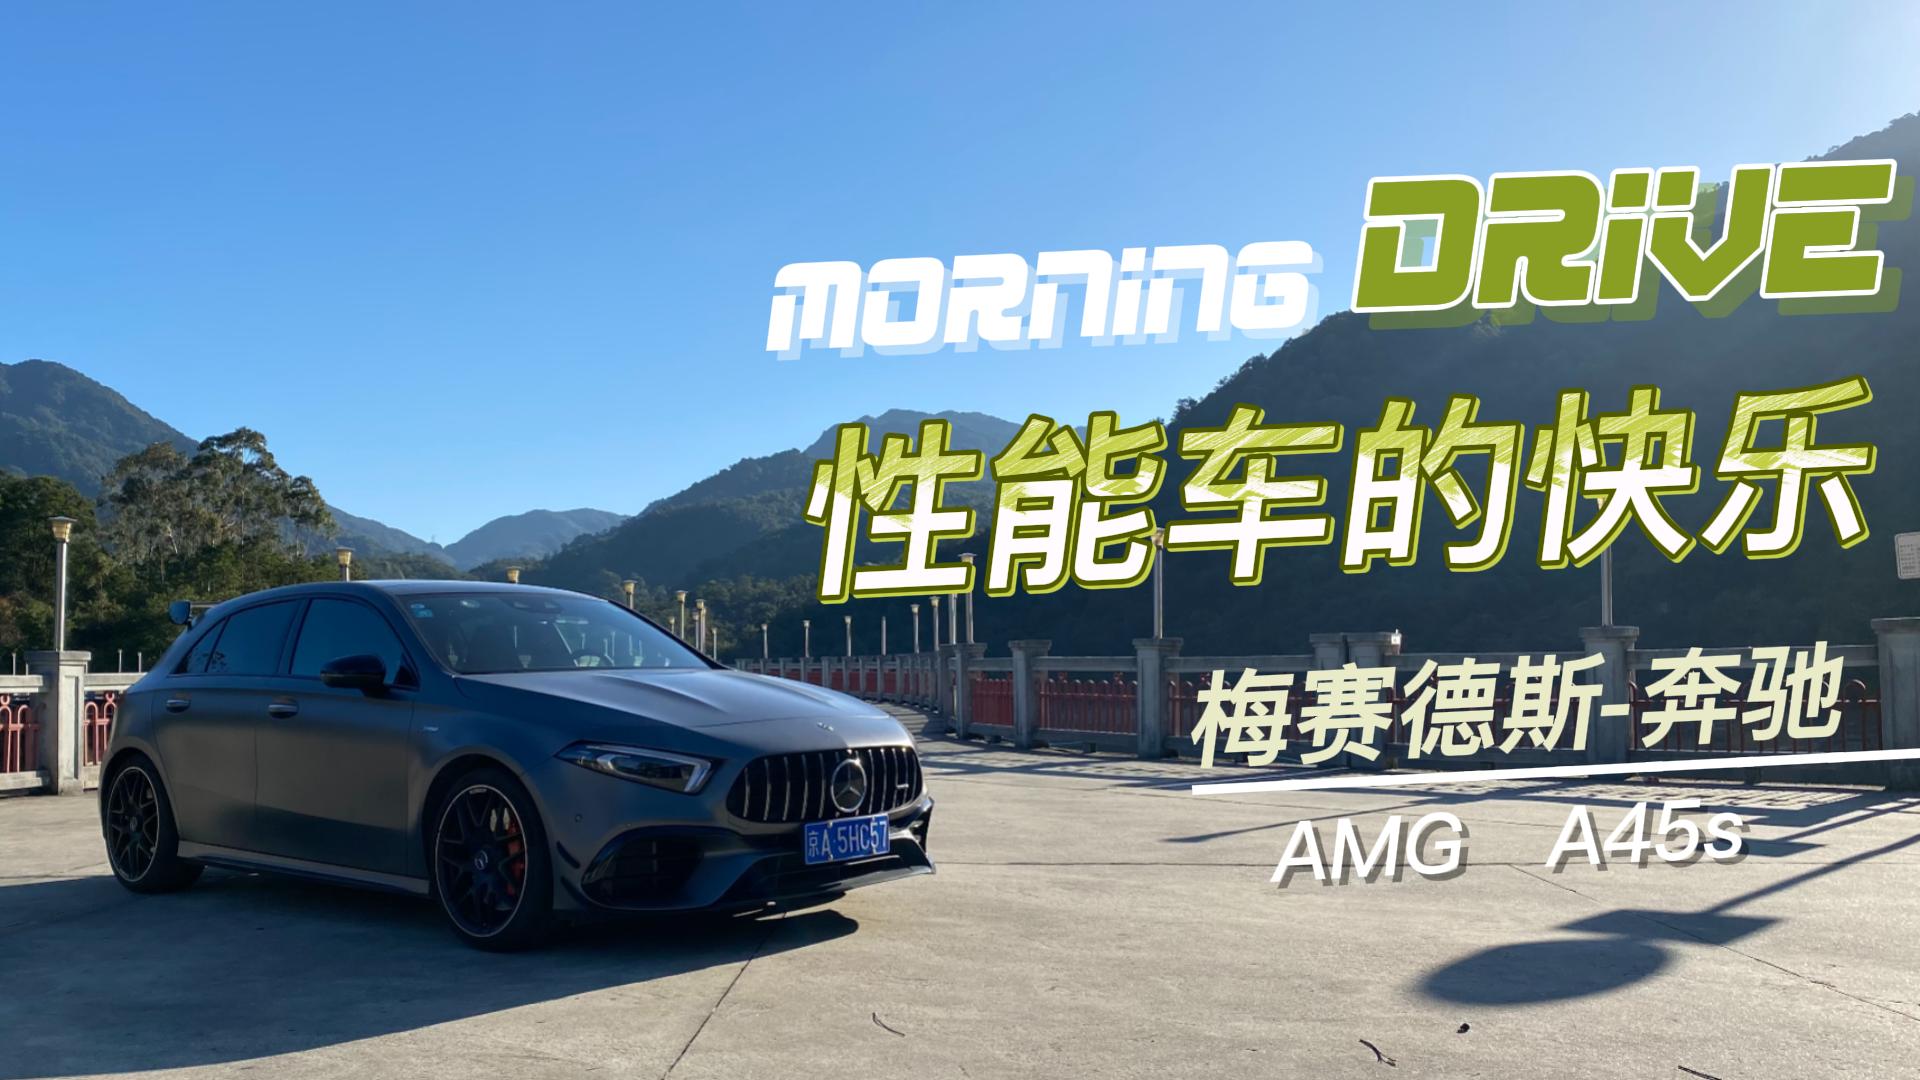 AMG A45s Morning drive